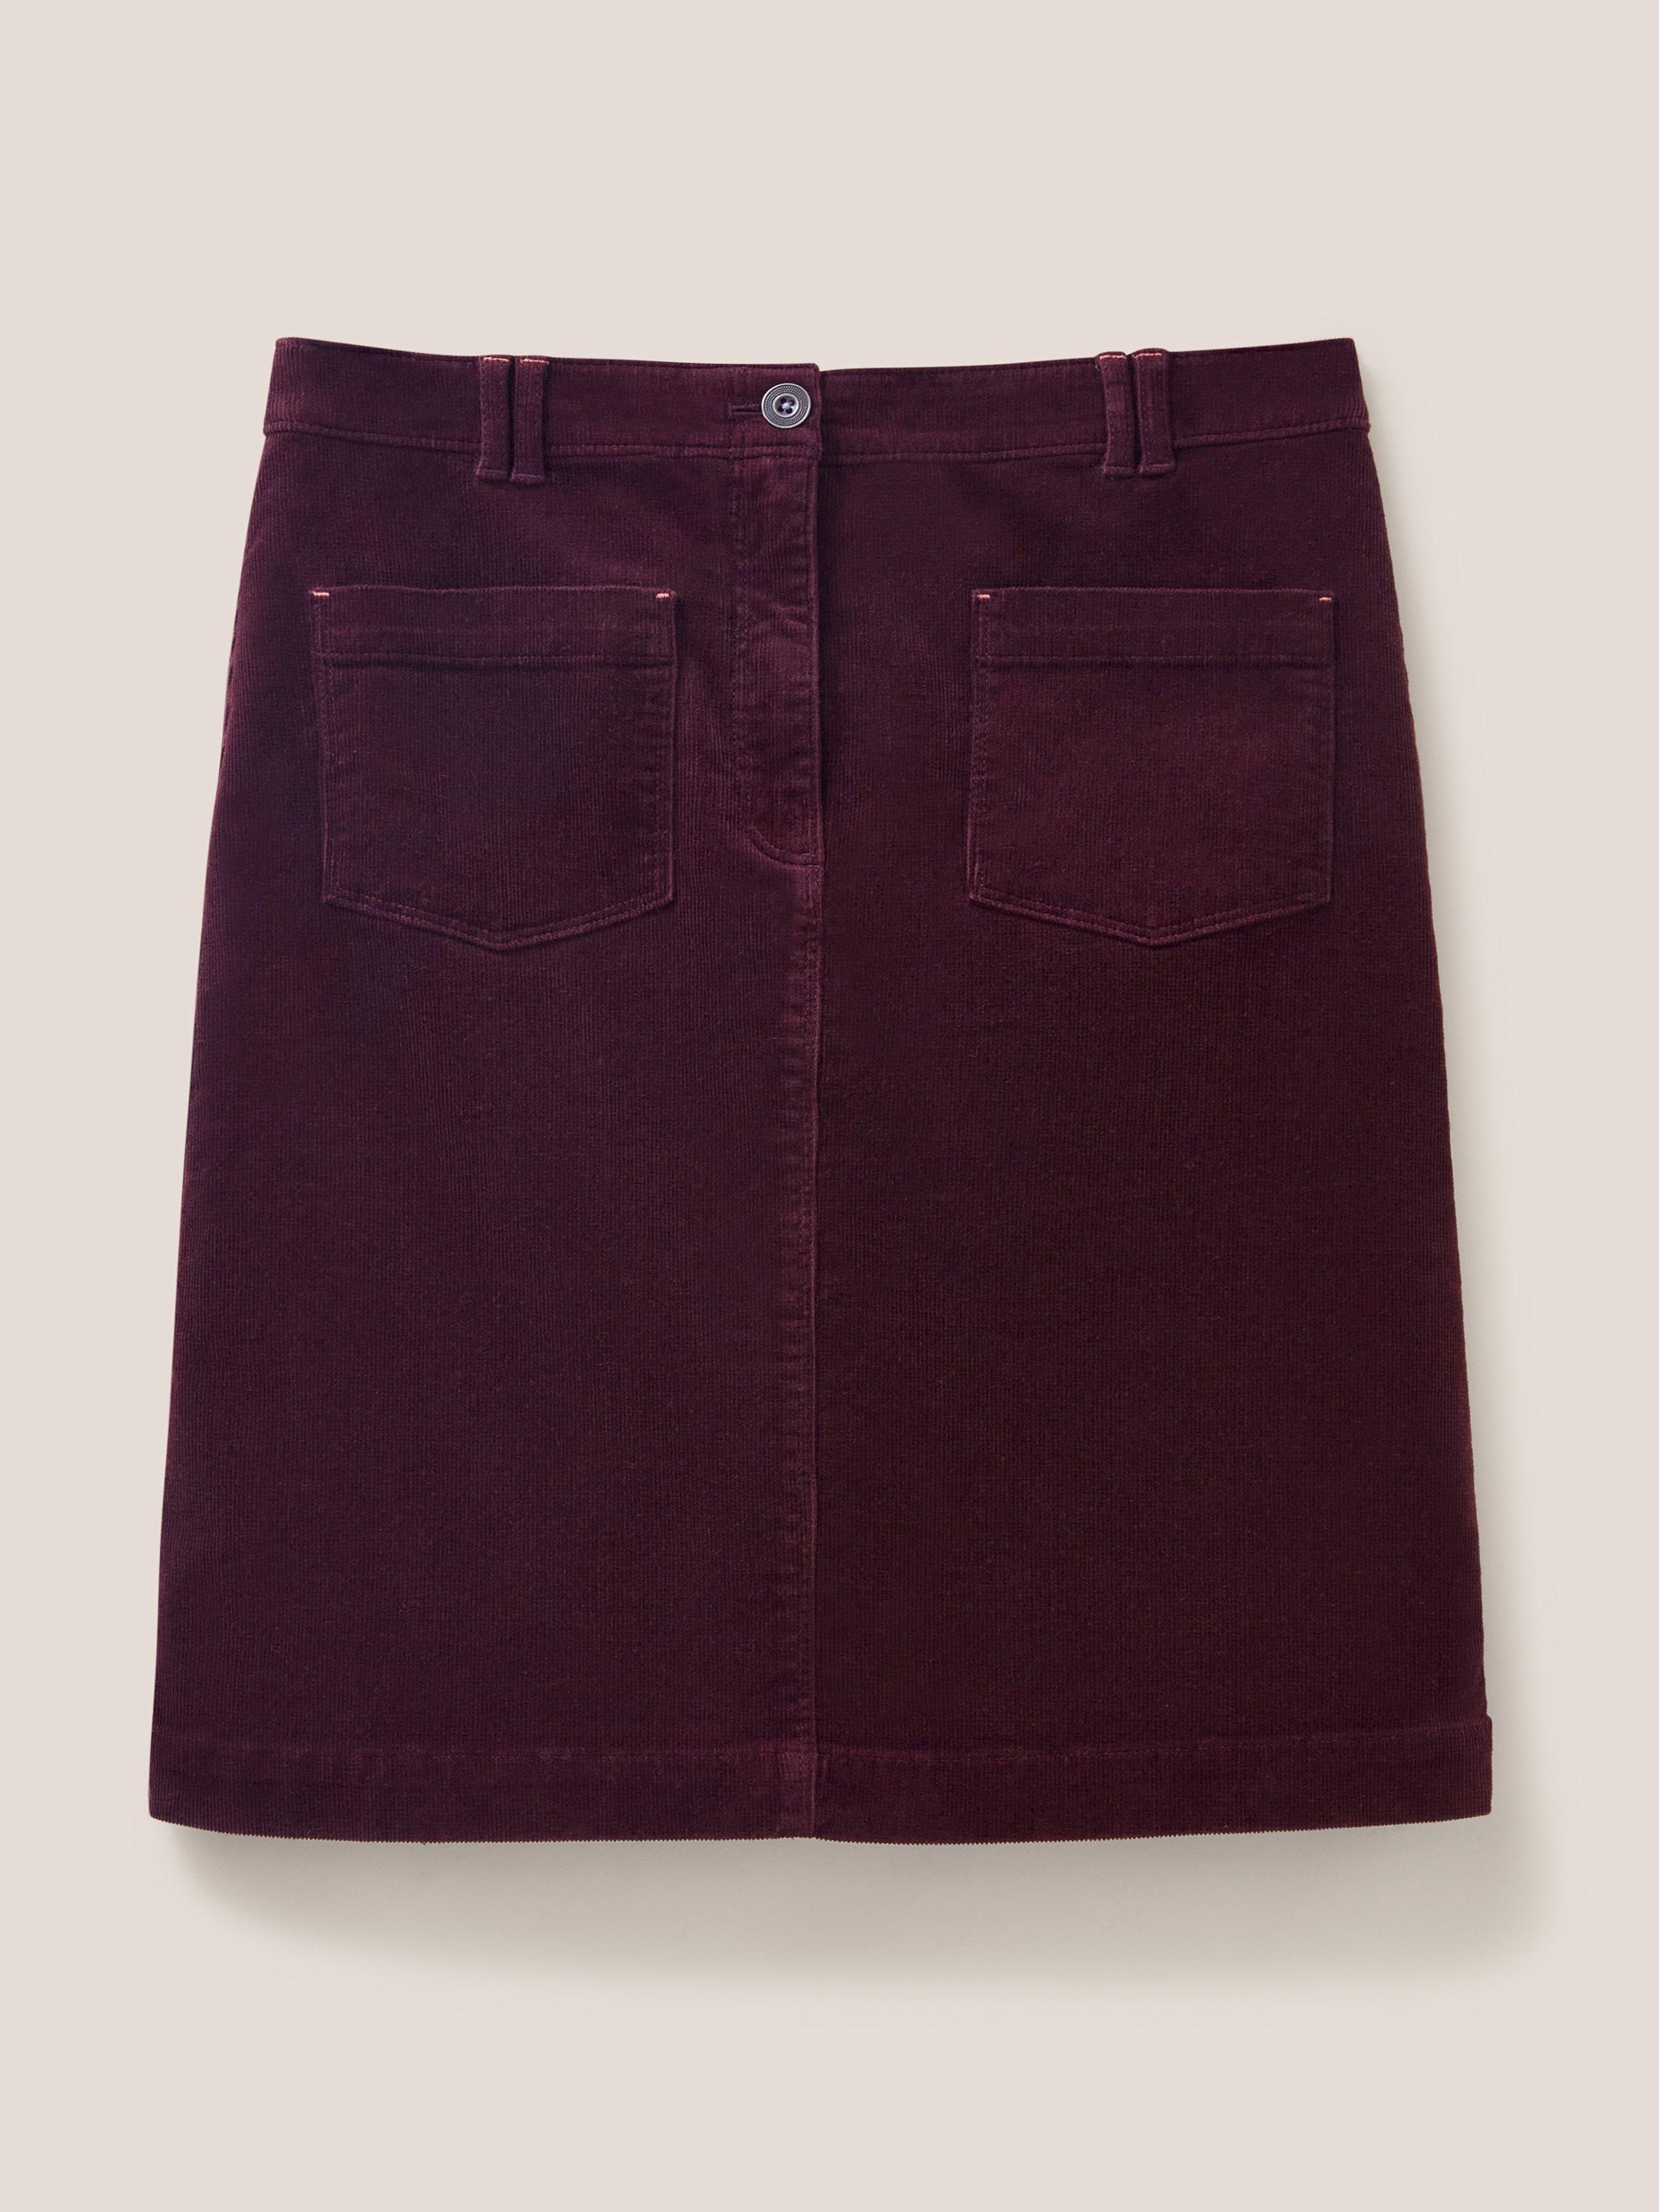 Melody Organic Cord Skirt in DK PLUM - FLAT FRONT